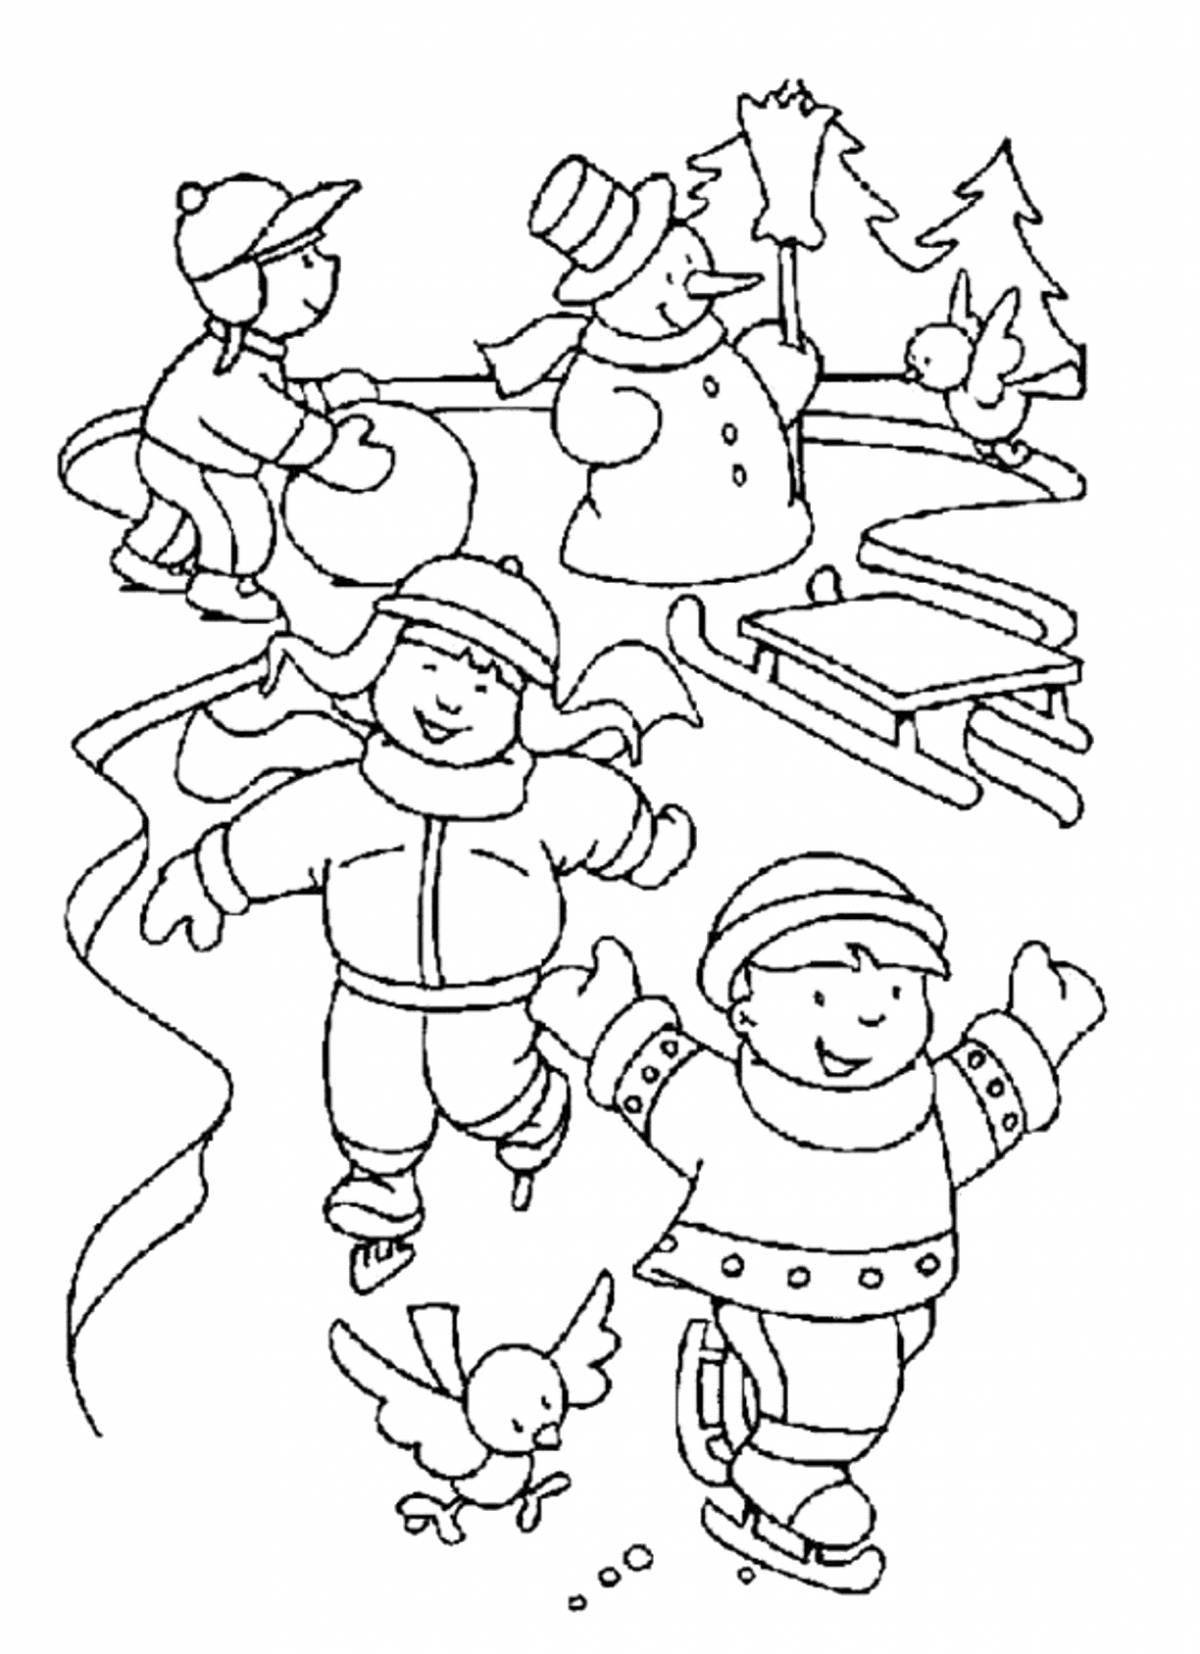 Colorful winter funny coloring book